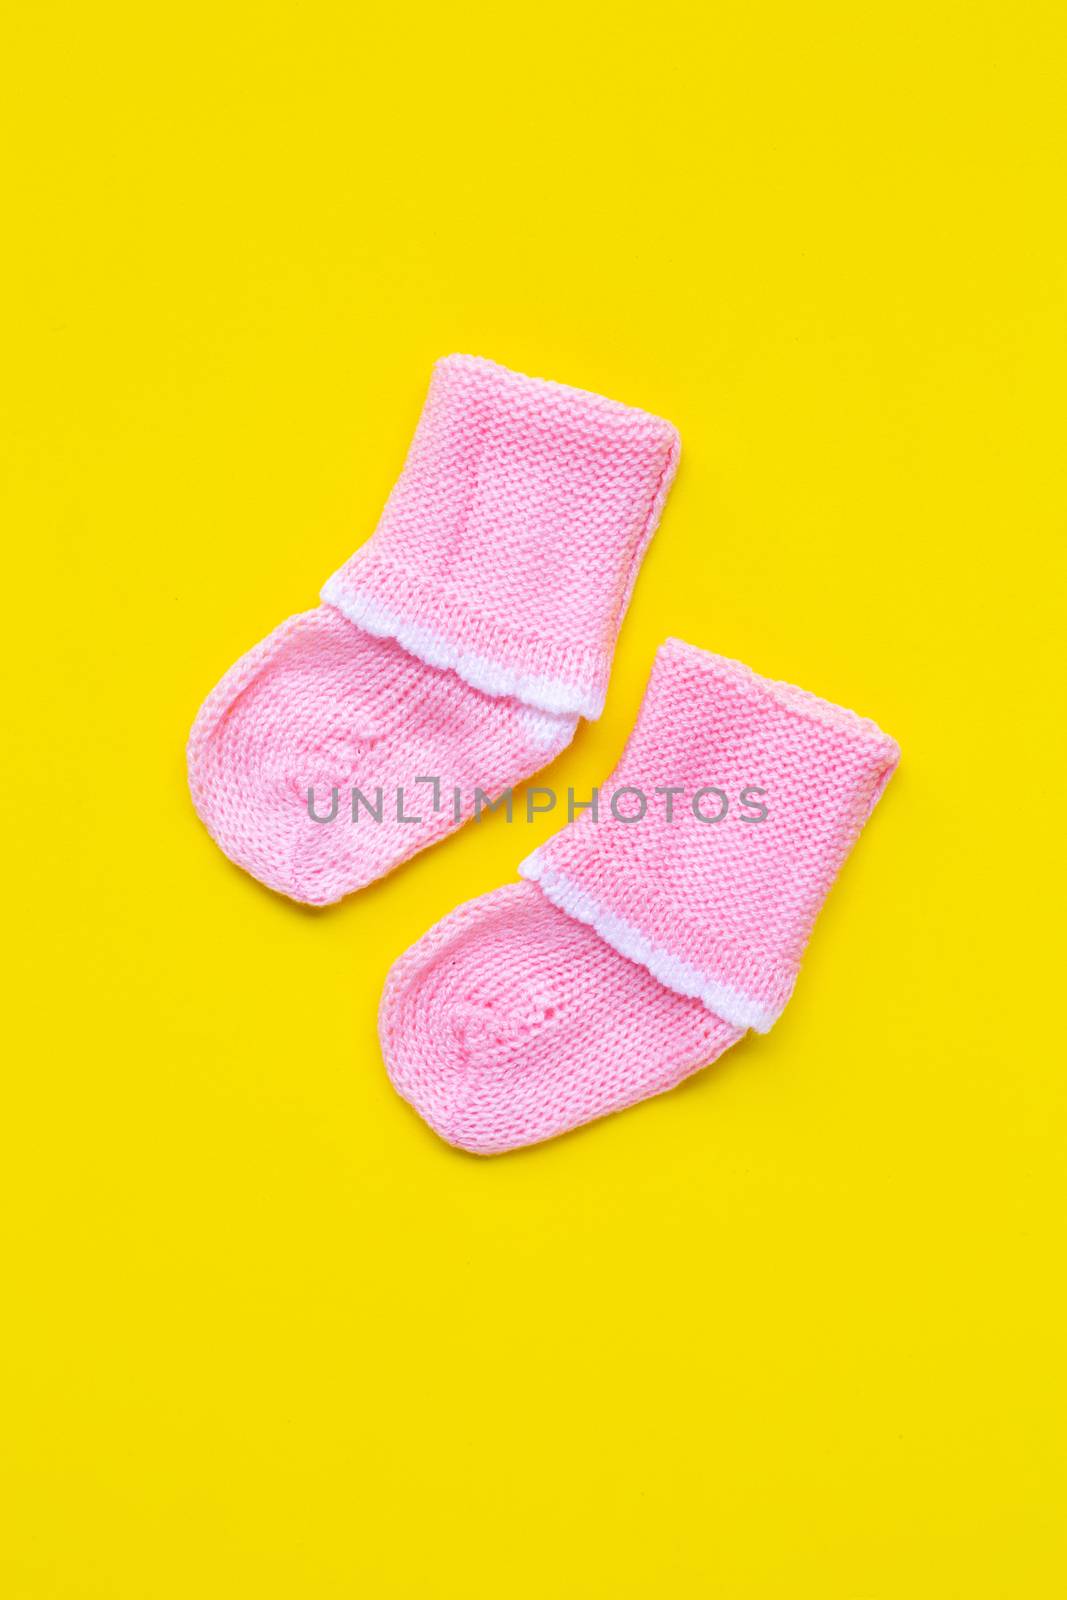 Baby socks on yellow background. Top view